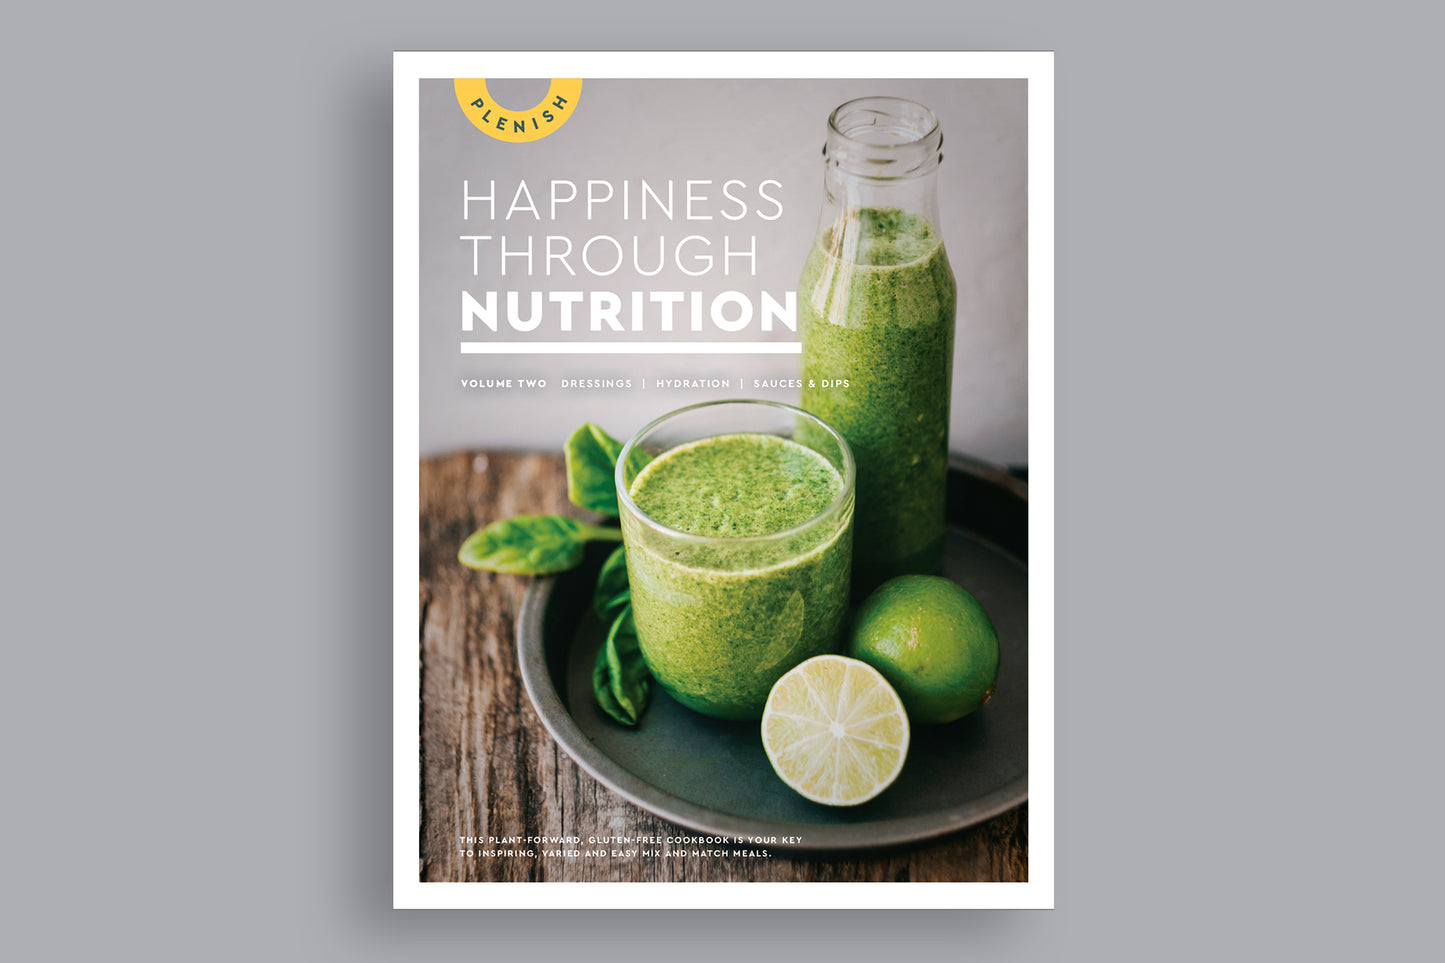 E cookbook - "Happiness through nutrition" Volume 2 - Dressing, Hydration, Sauces & Dips